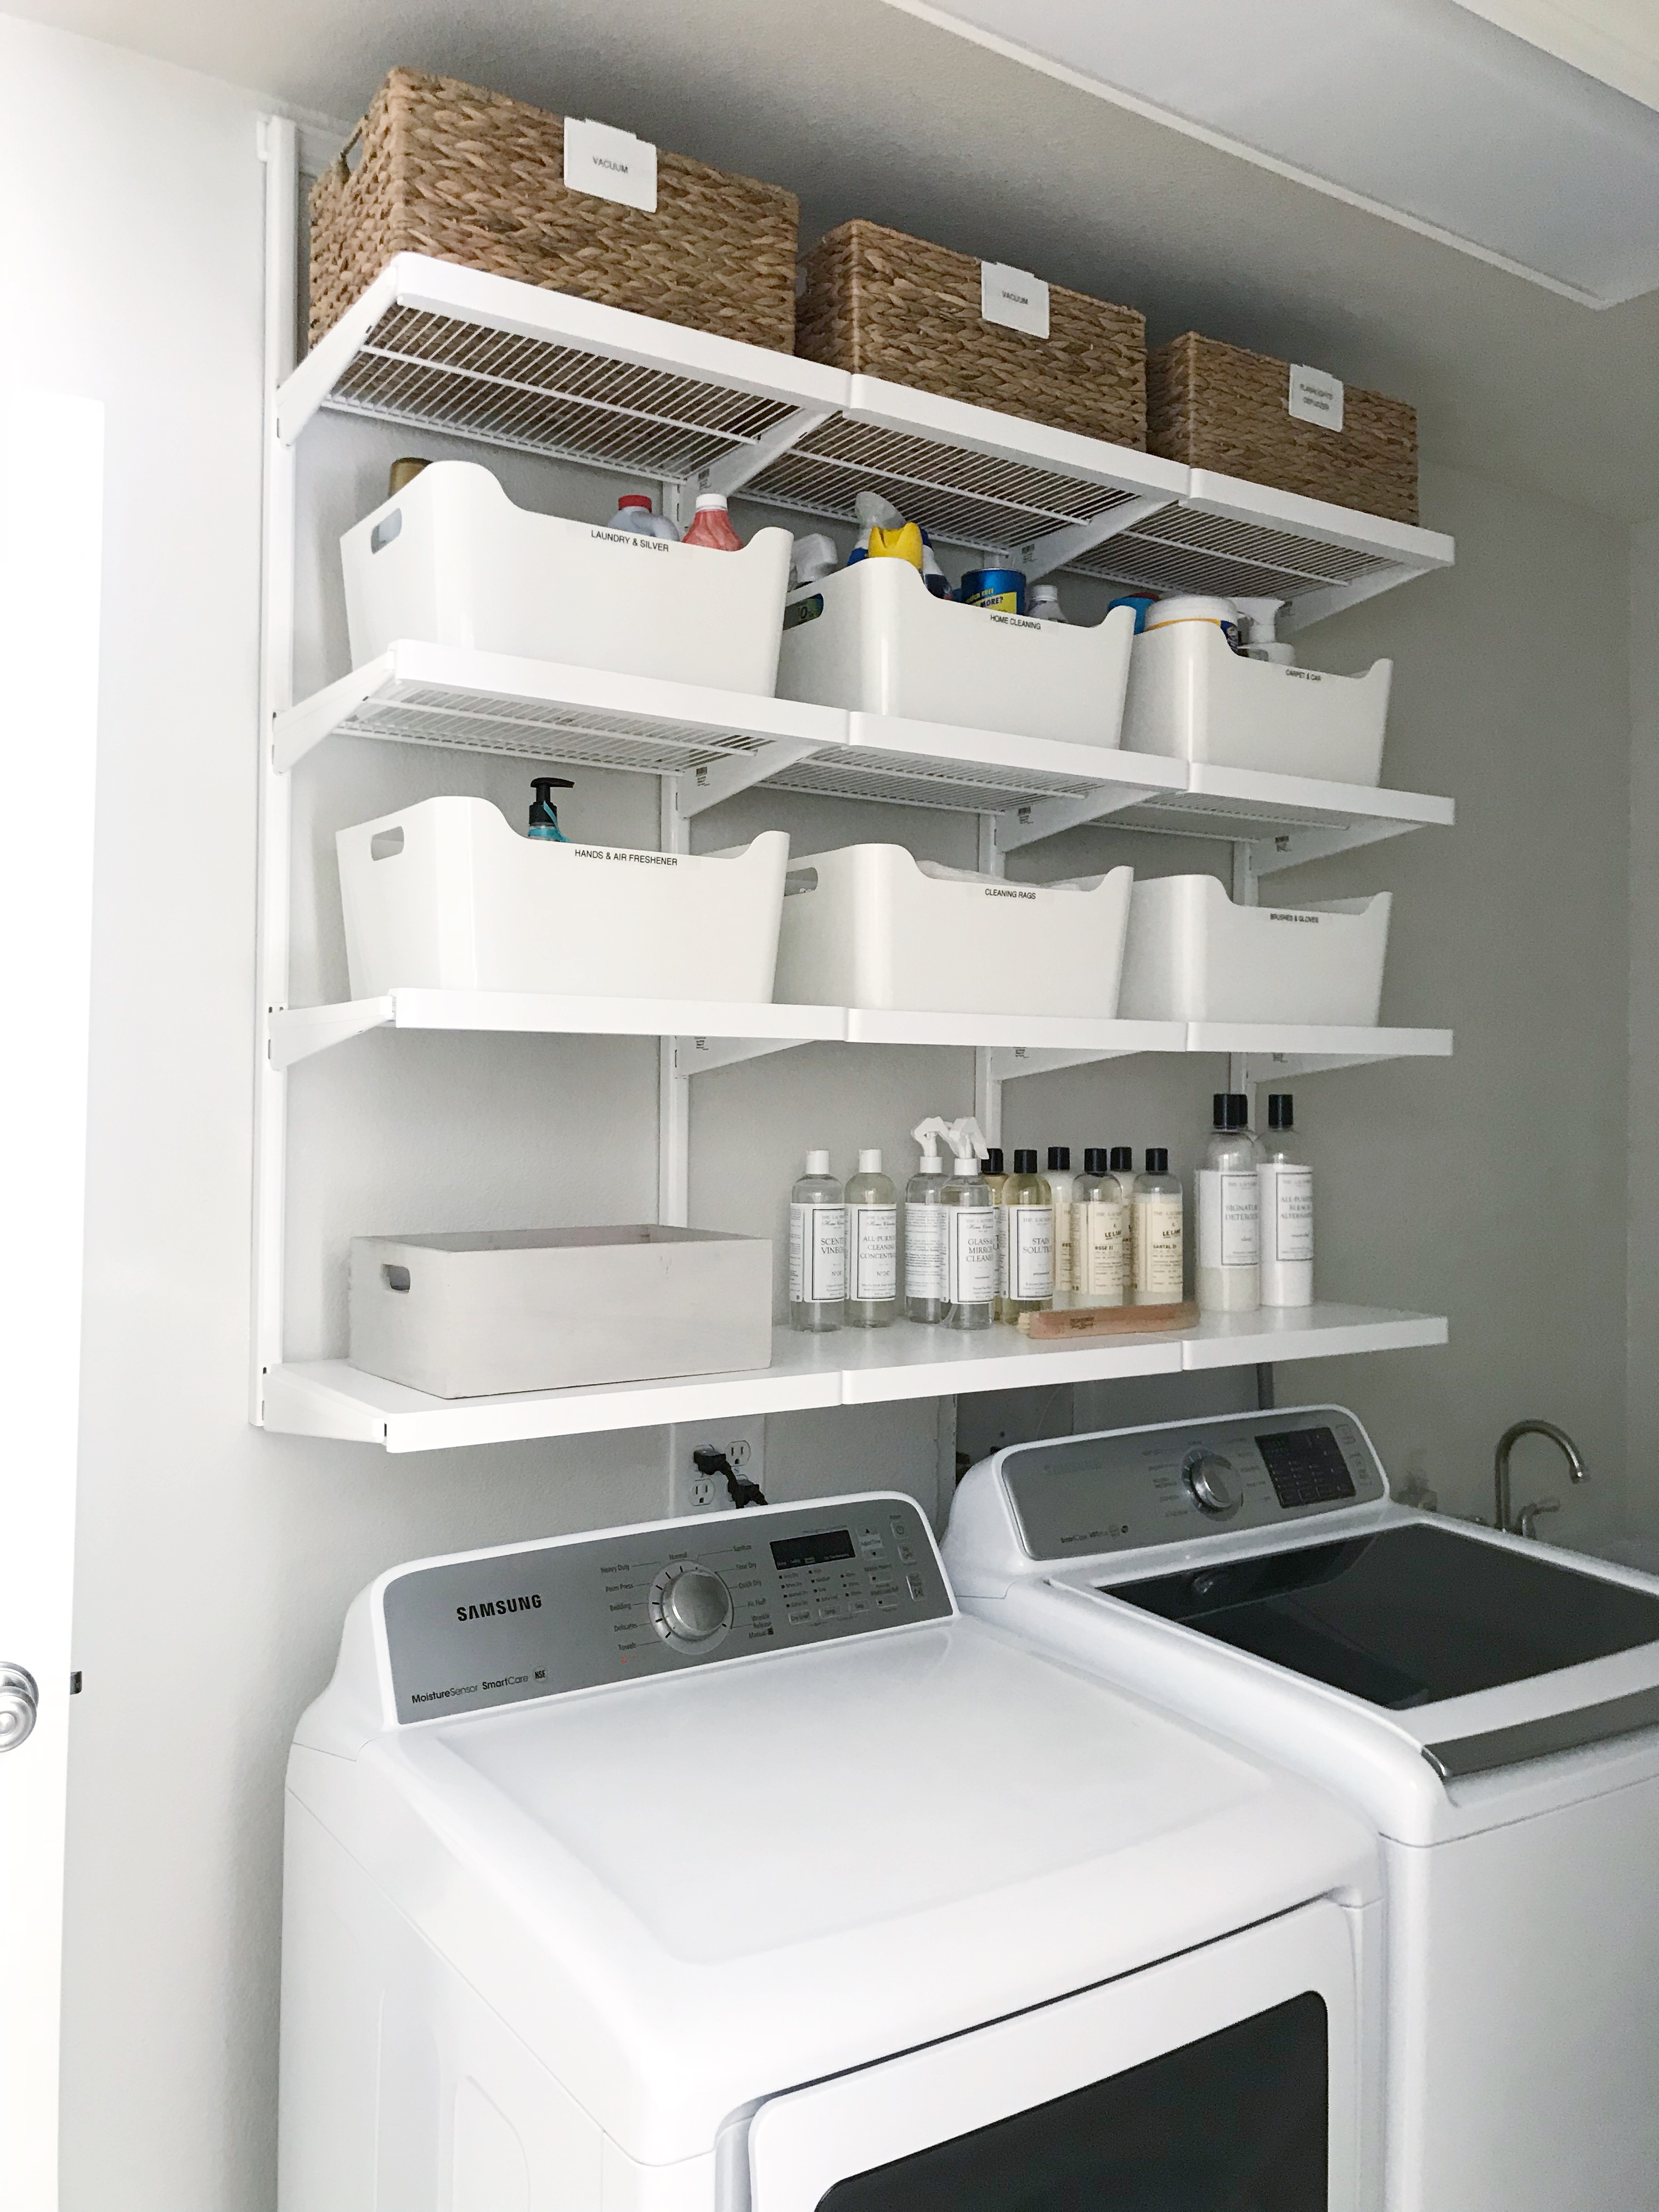 Creatice Shelving For Laundry Room for Small Space